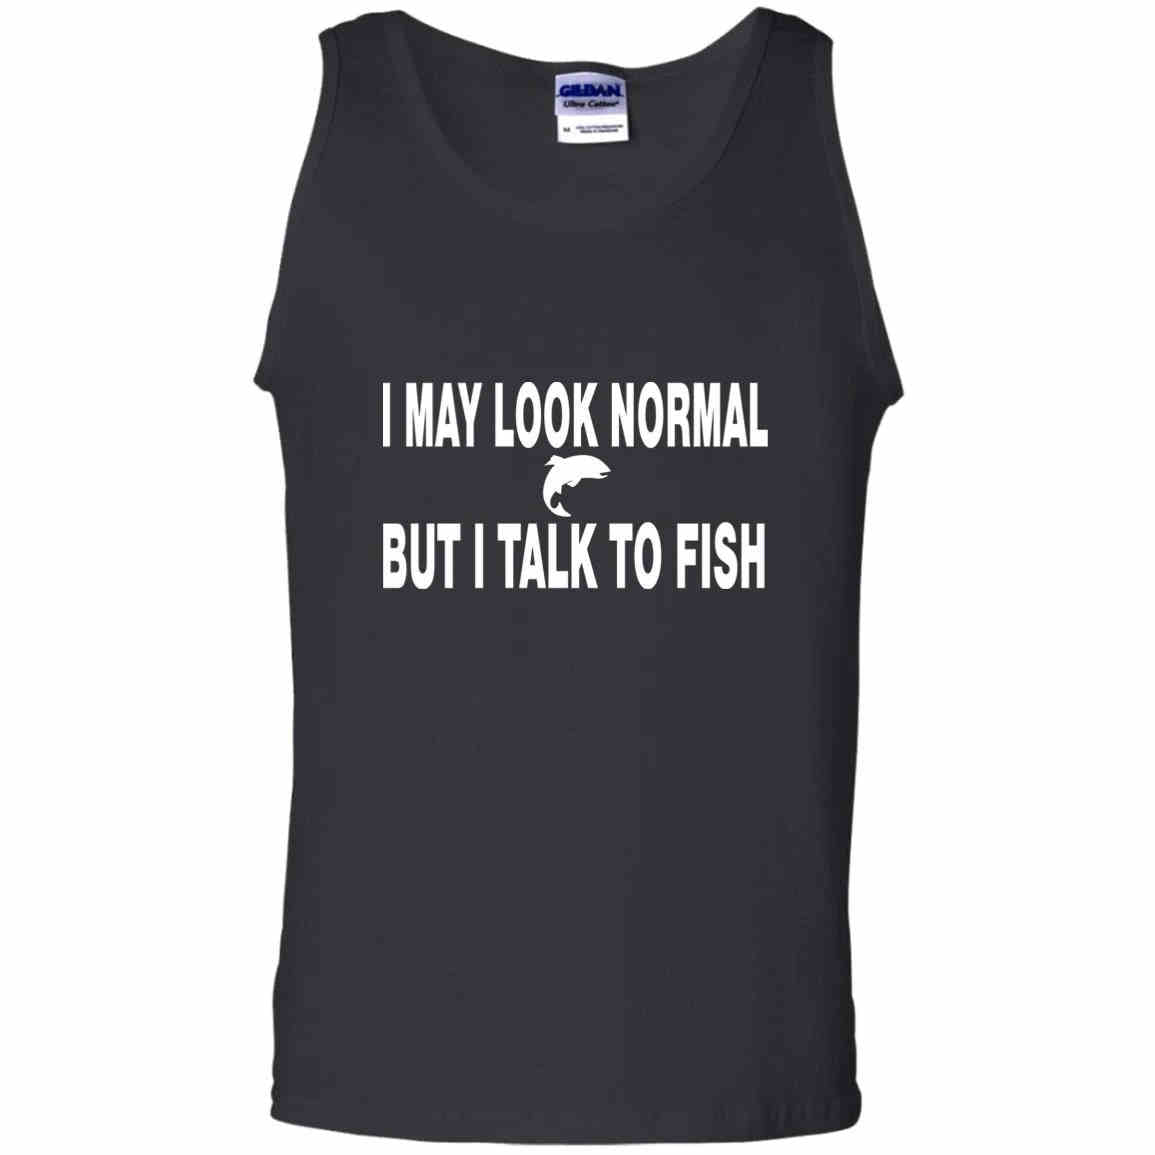 I may look normal but i talk to fish w tank top black